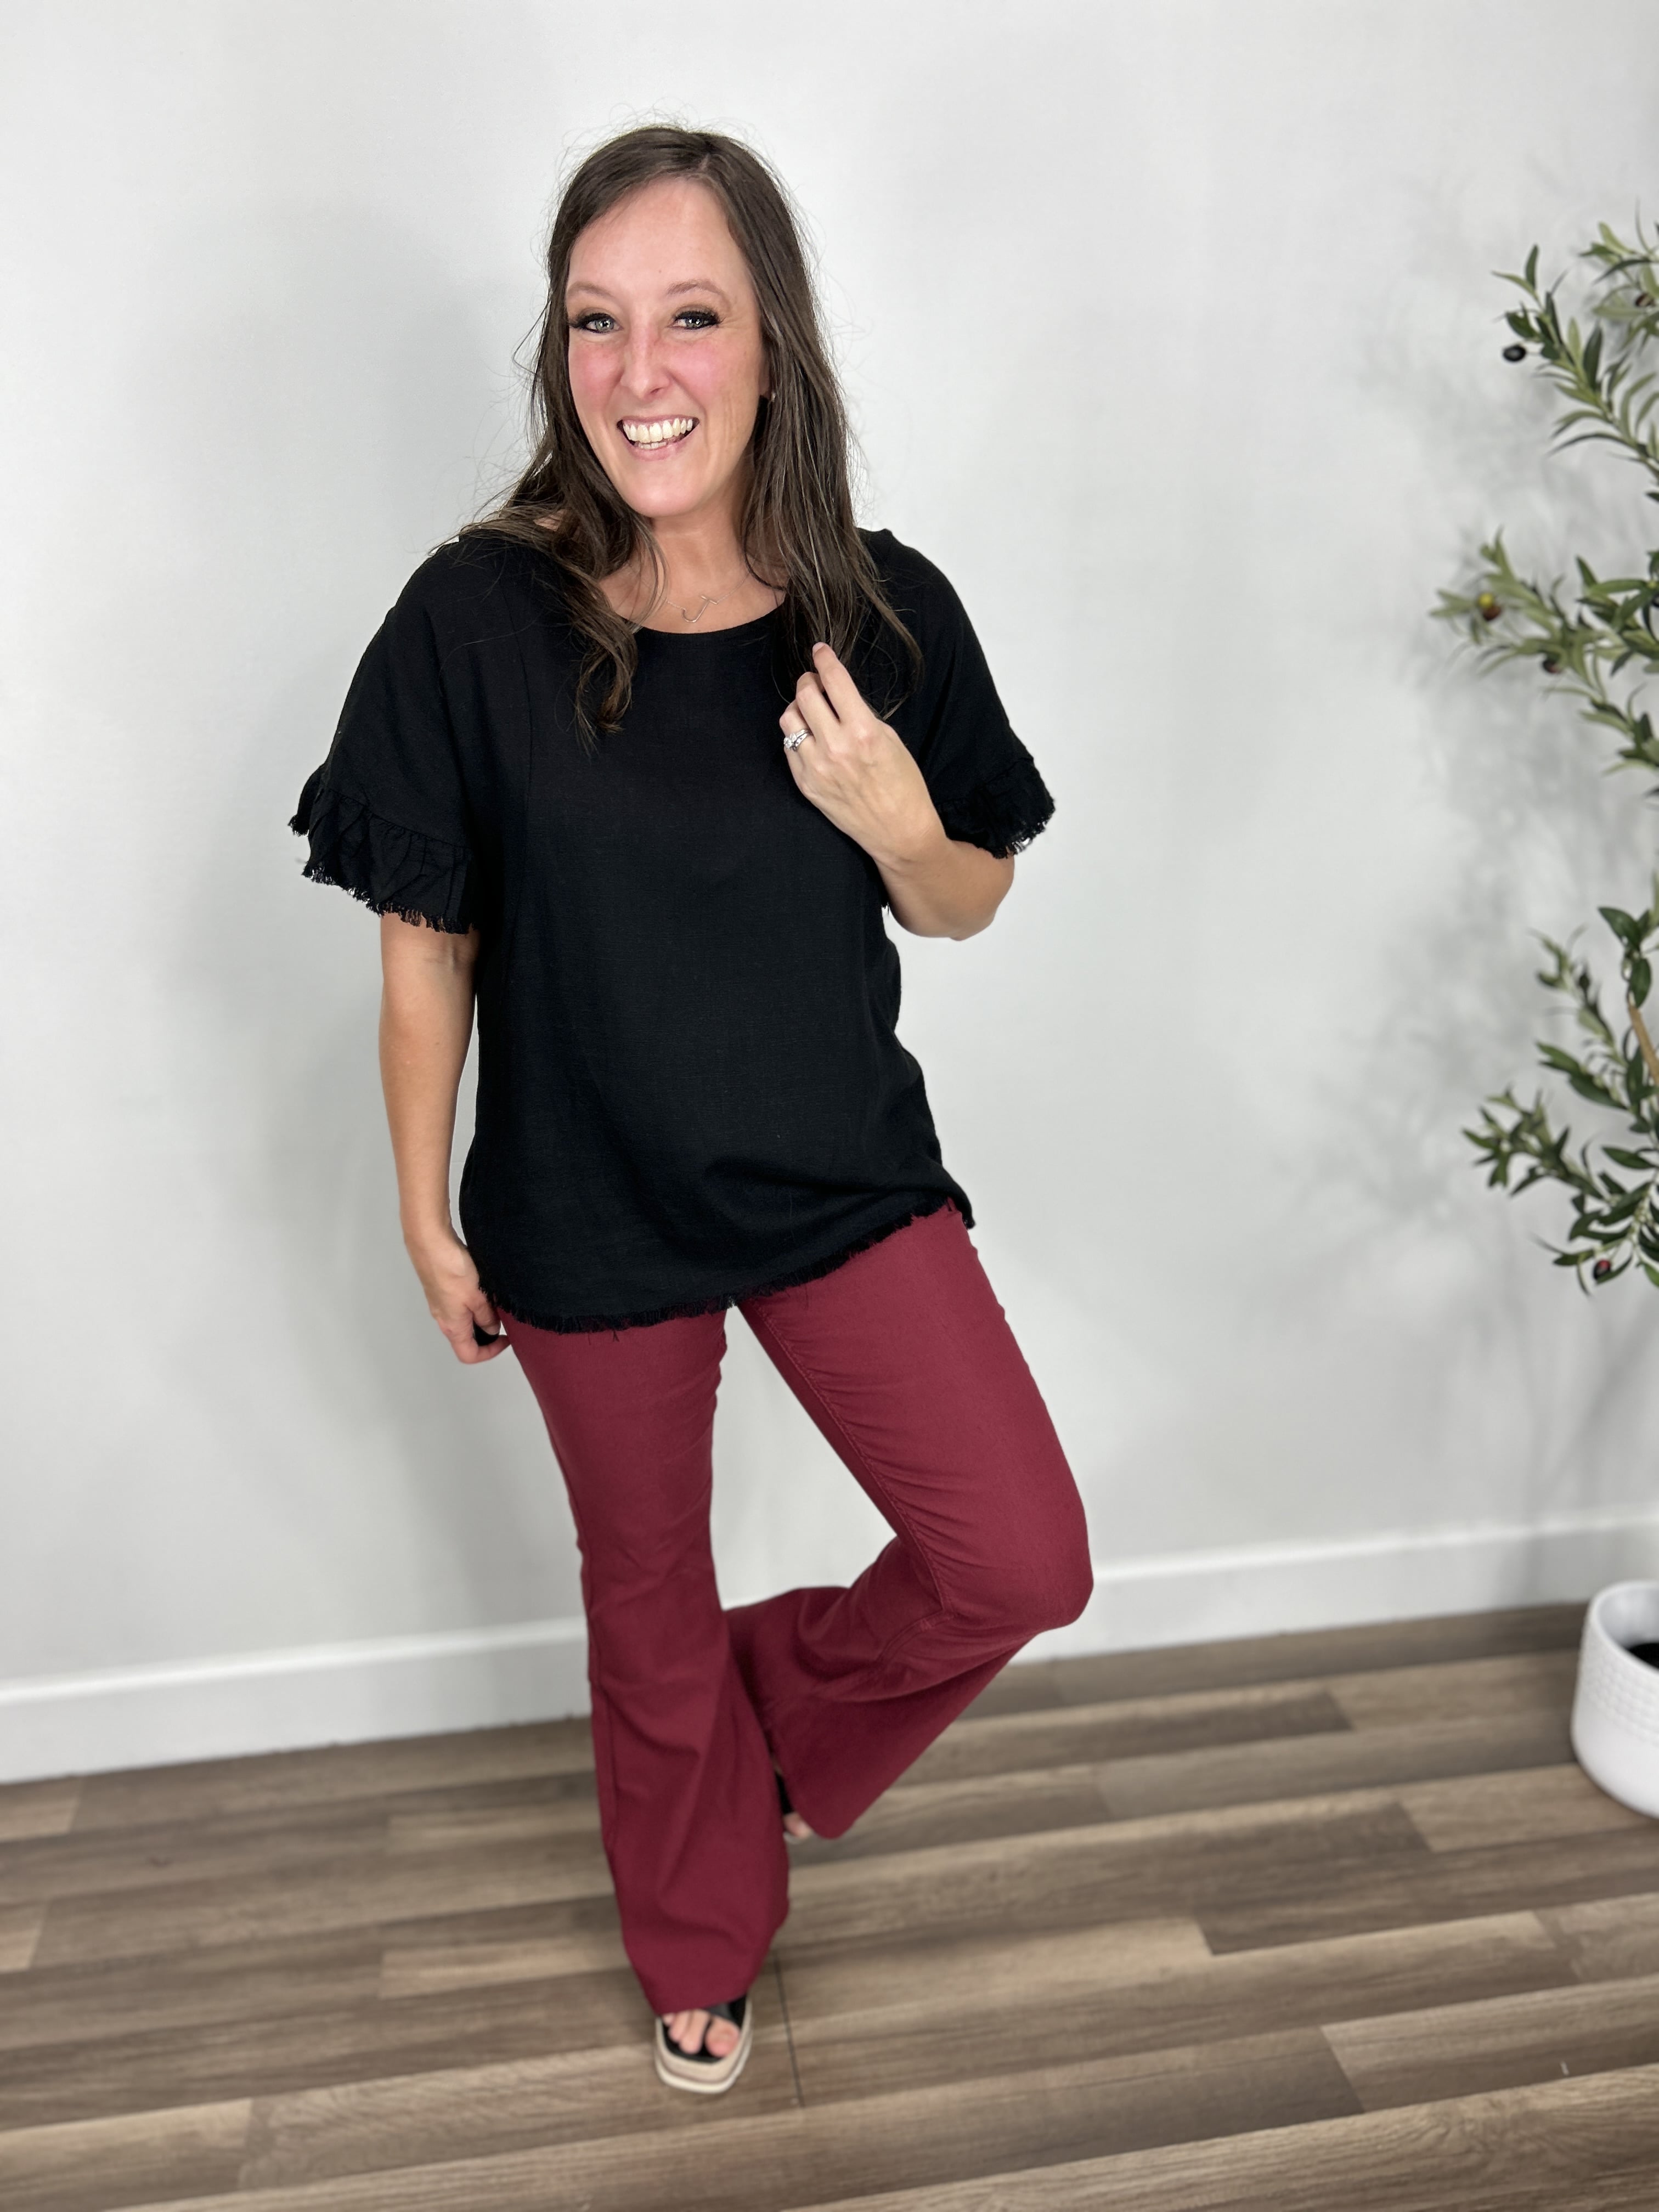 Women's black short sleeve top with back cutout paired with maroon flare pants and black wedge sandals.